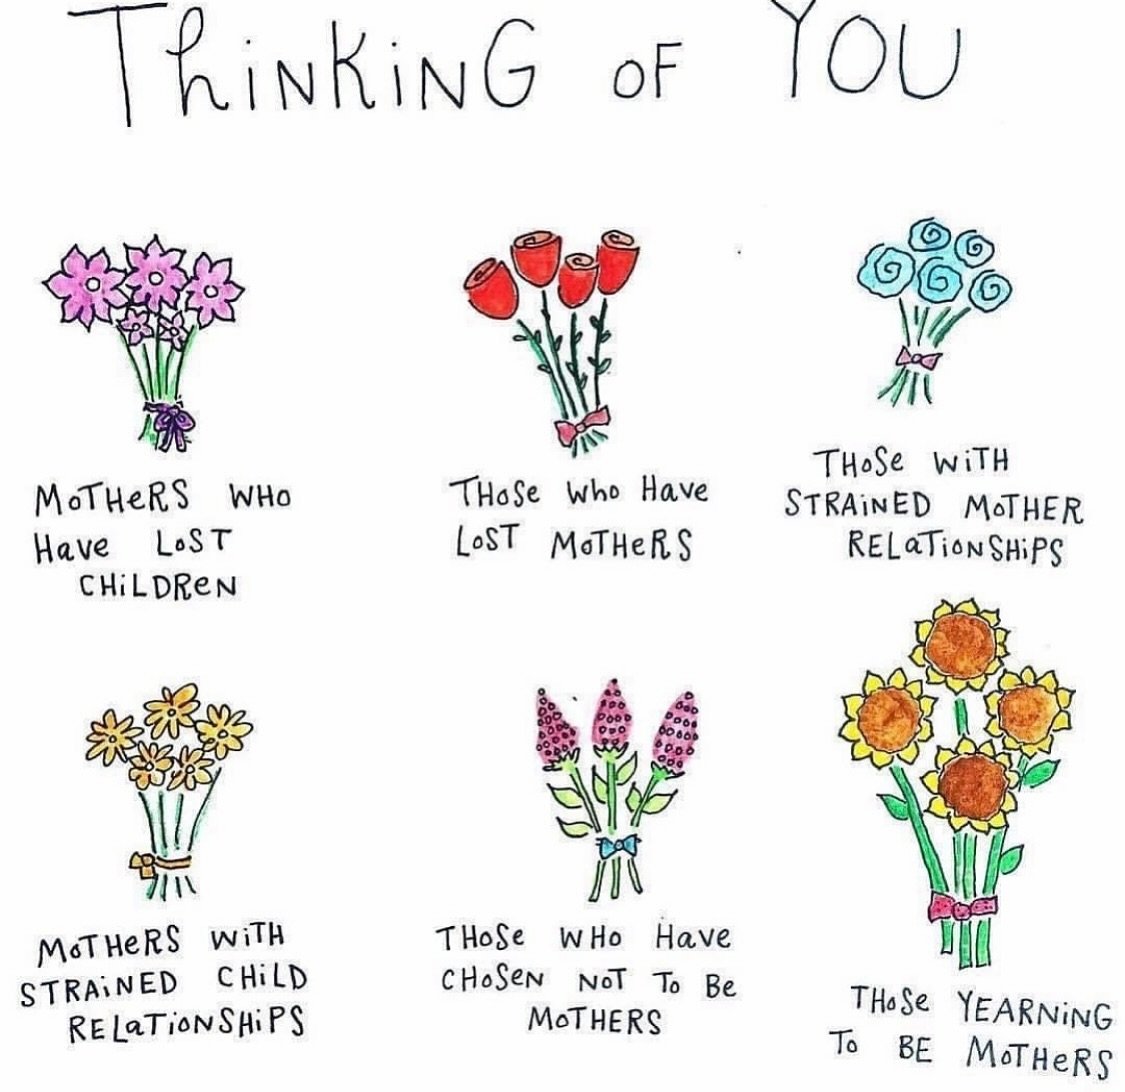 Double tap and tag someone who needs this right now 💐 ❤️ 

#mother #mothersday